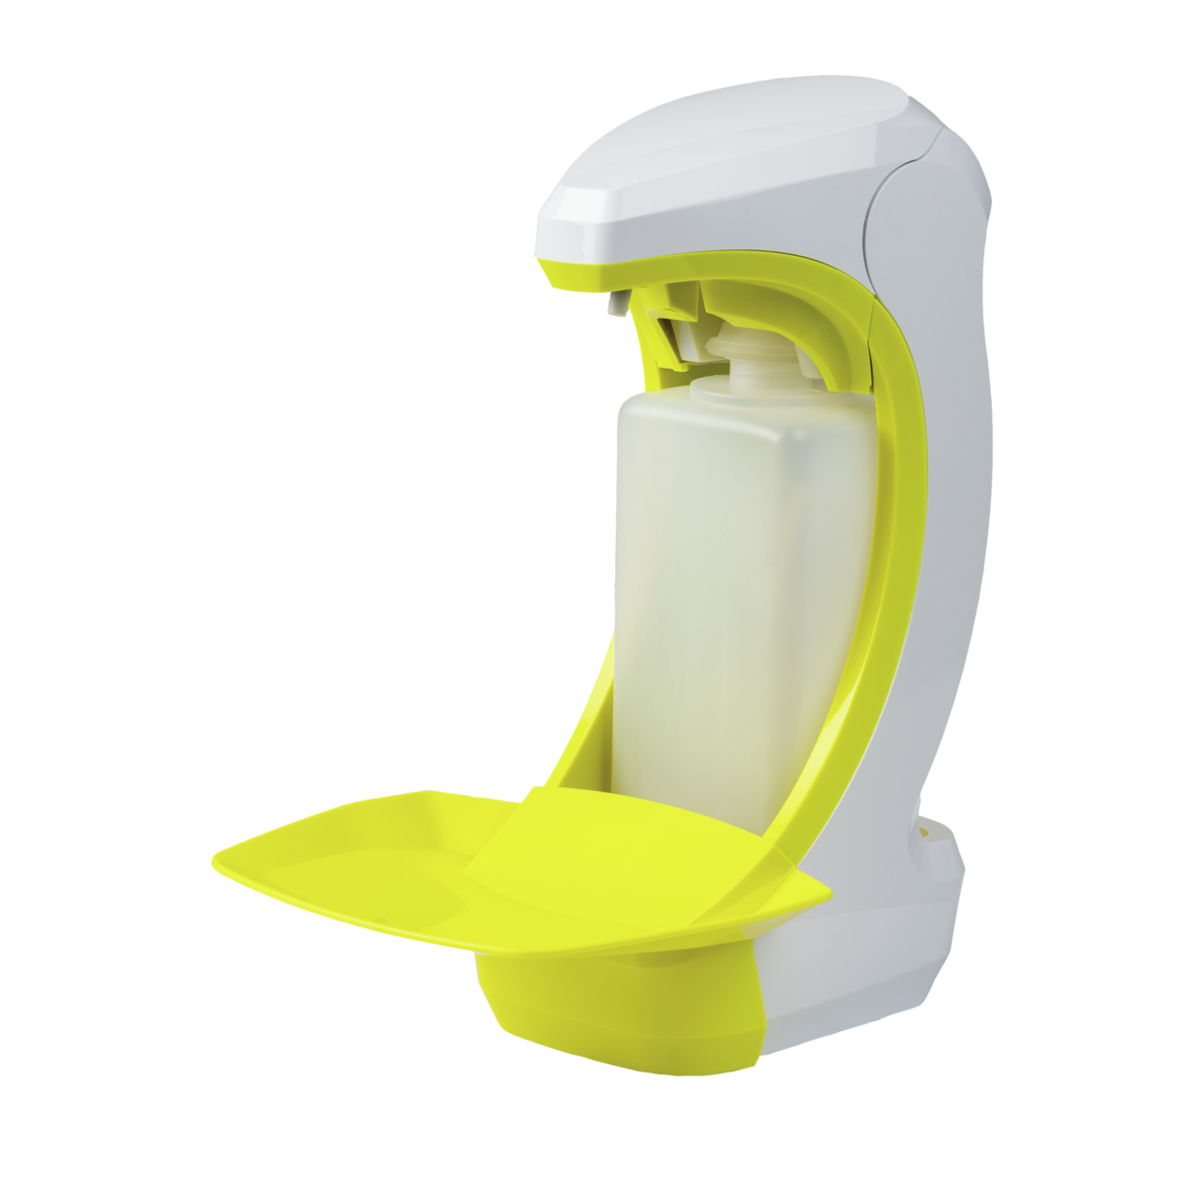 RX 5 T hi-vis yellow (1,5 ml) with yellow drip tray